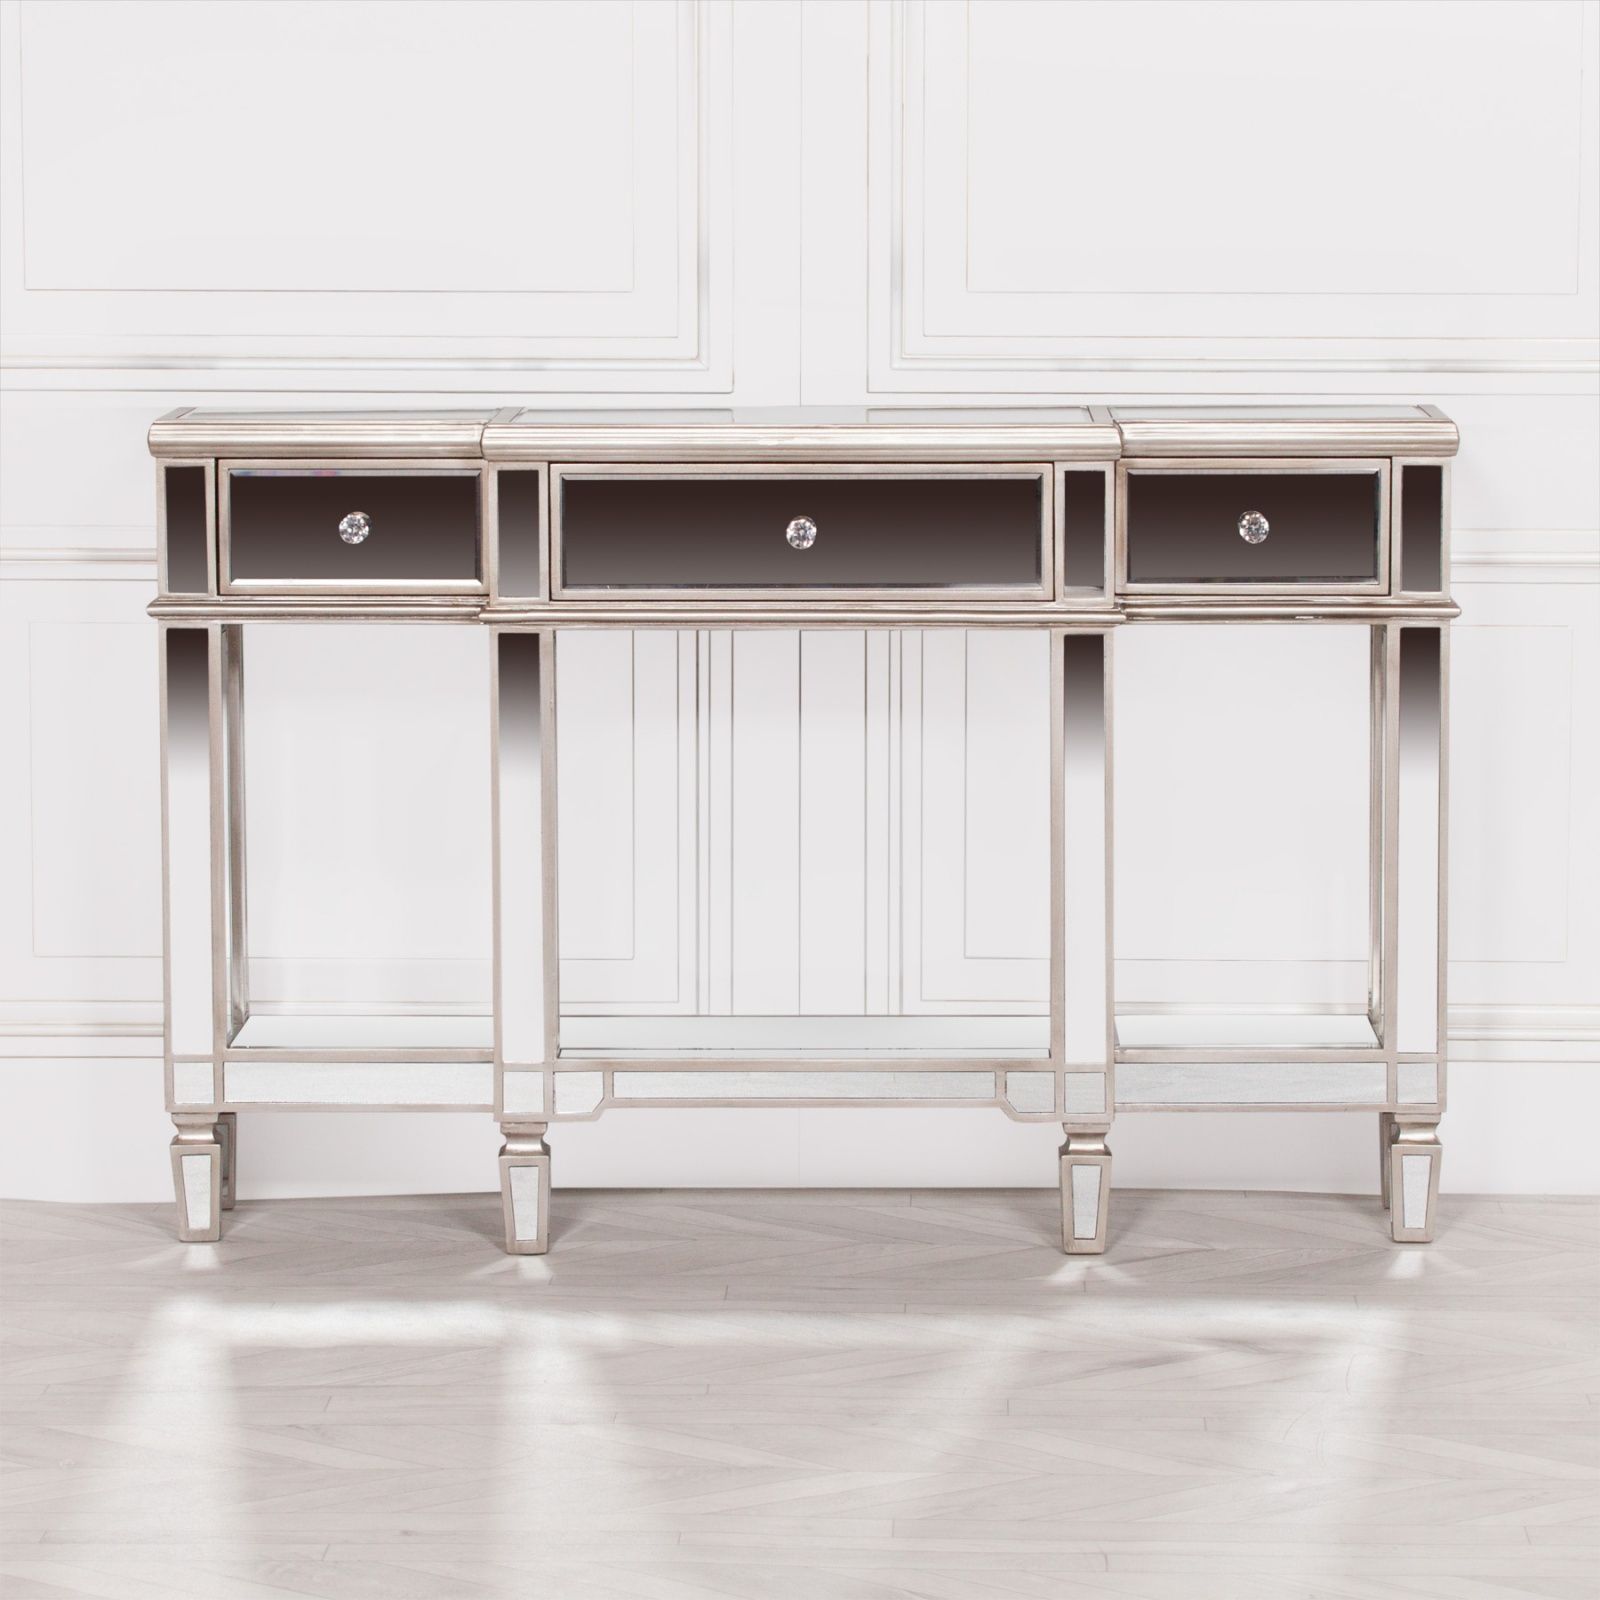 Venetian Hall Demilune Mirrored Silver Console Table Pertaining To Silver Console Tables (View 7 of 20)